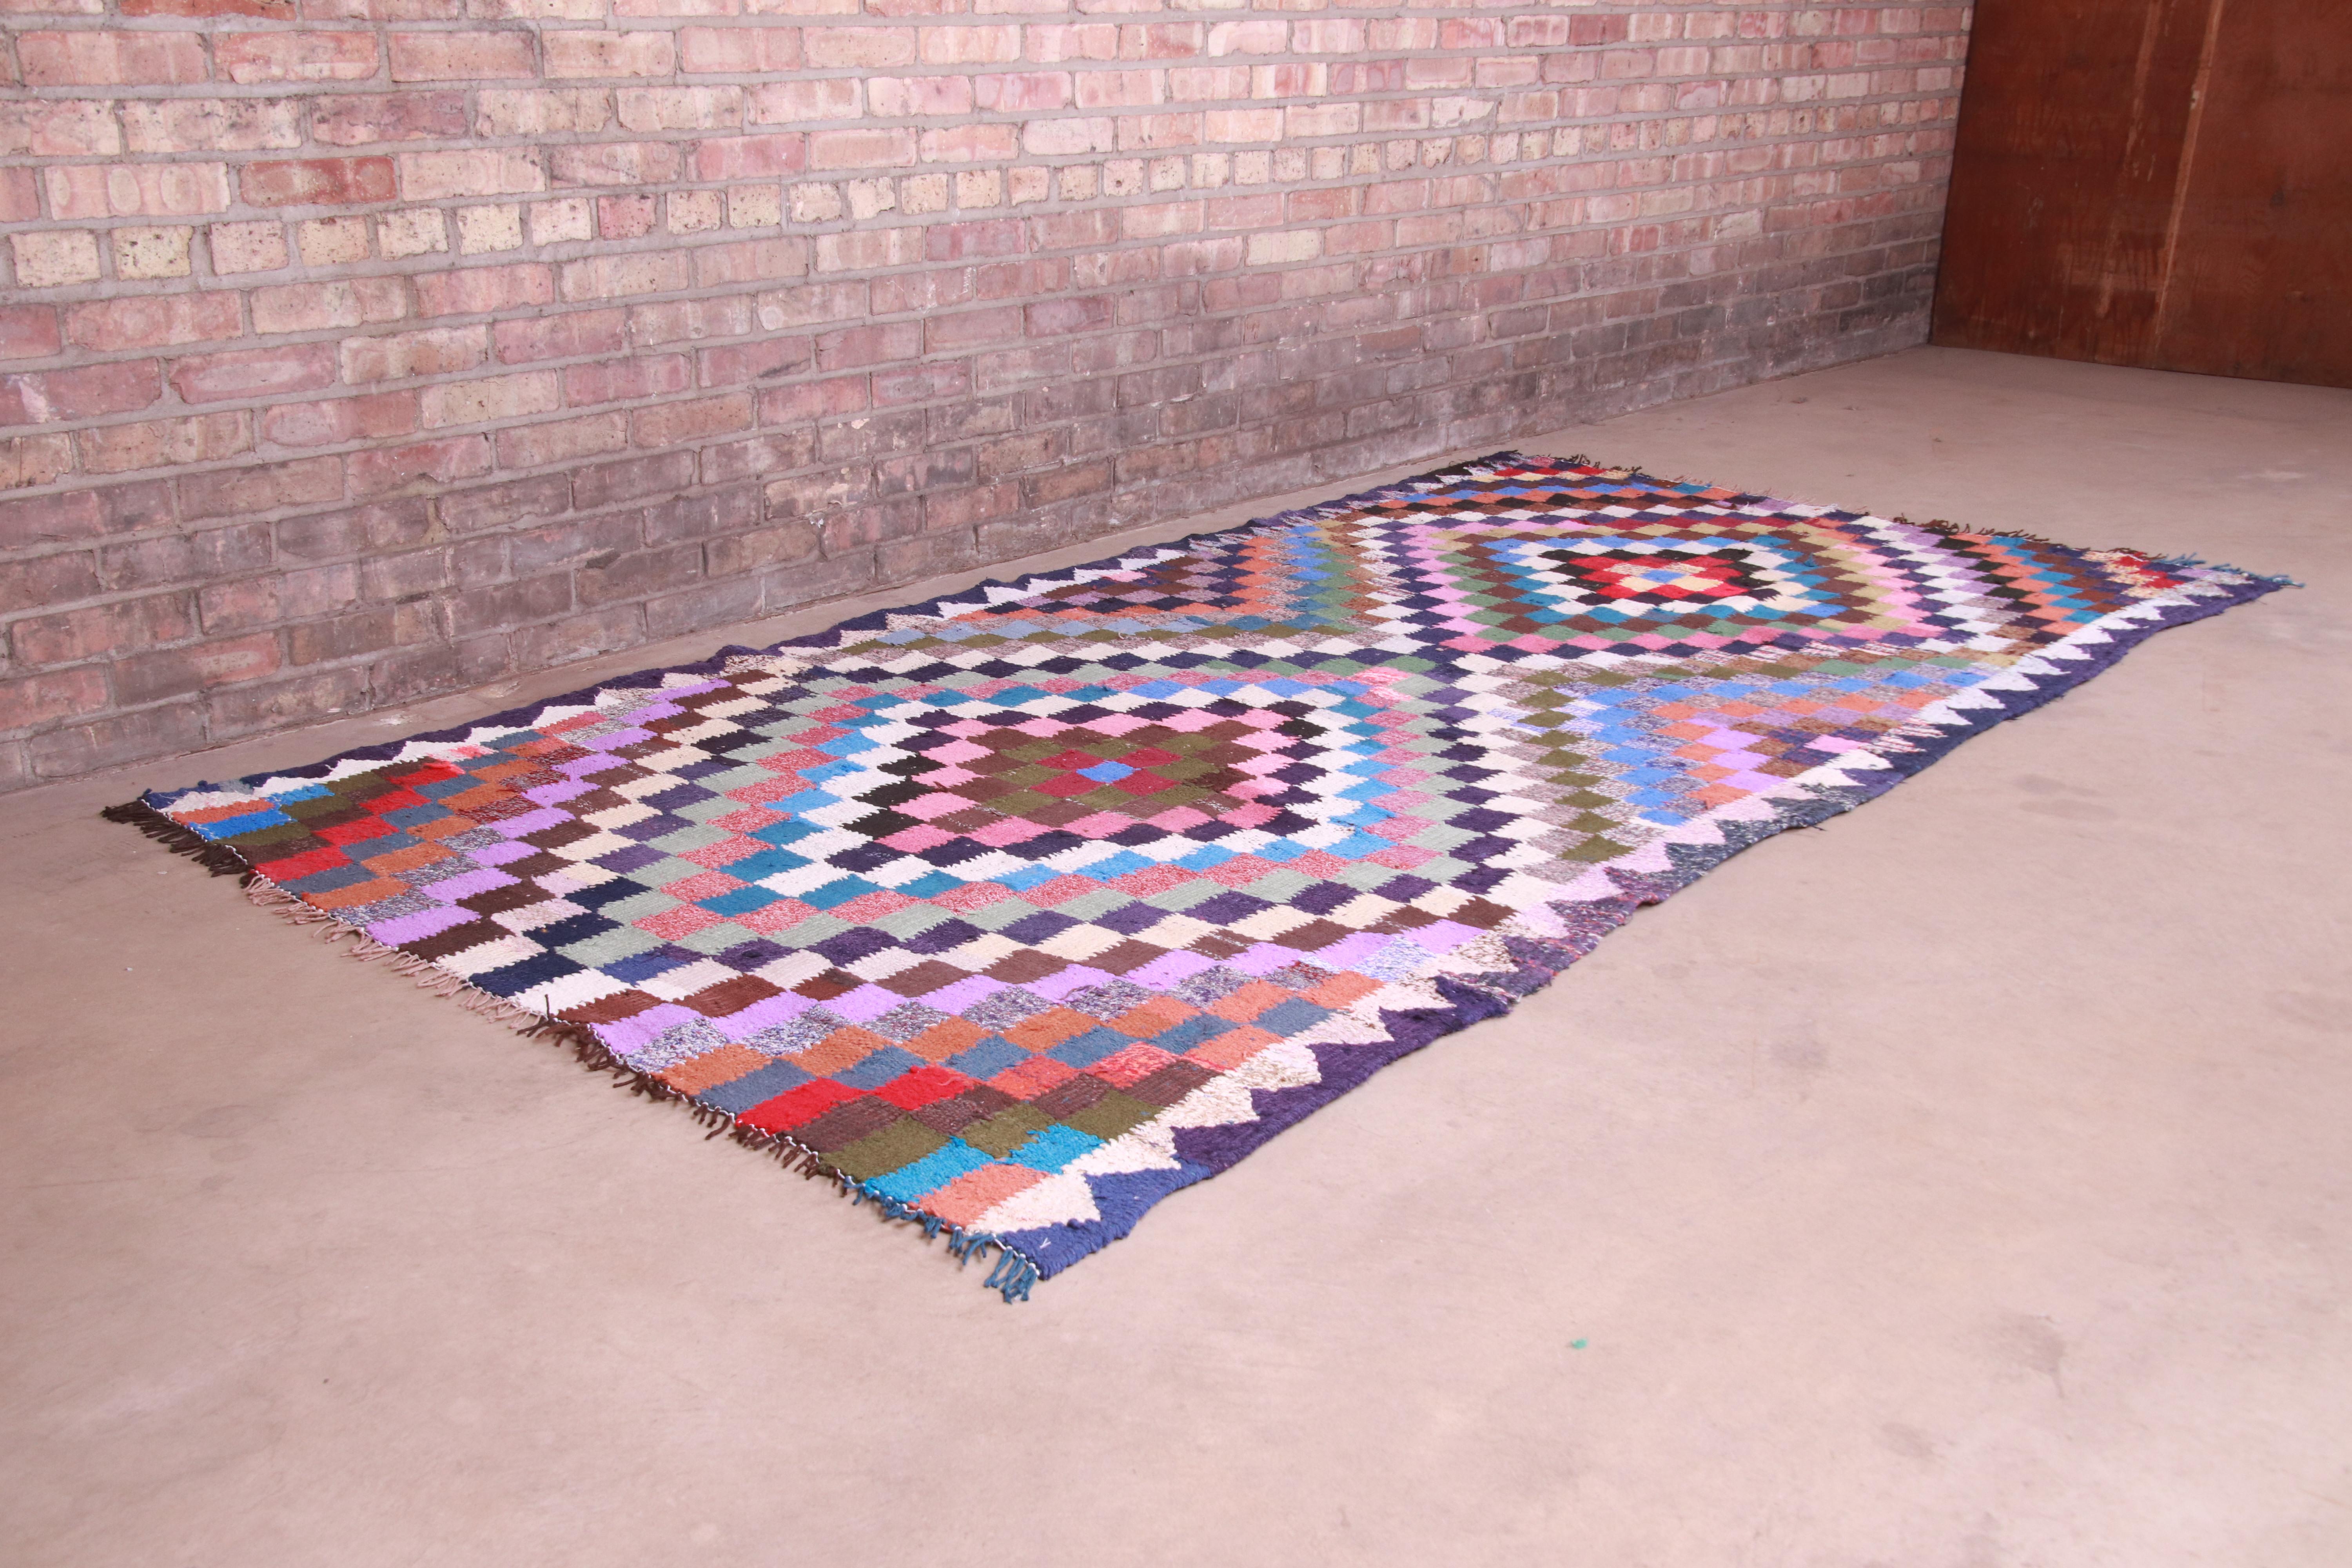 A gorgeous Mid-Century Modern handwoven Persian Kilim rug

Mid-20th Century

Colorful and vibrant geometric design

Measures: 4'10